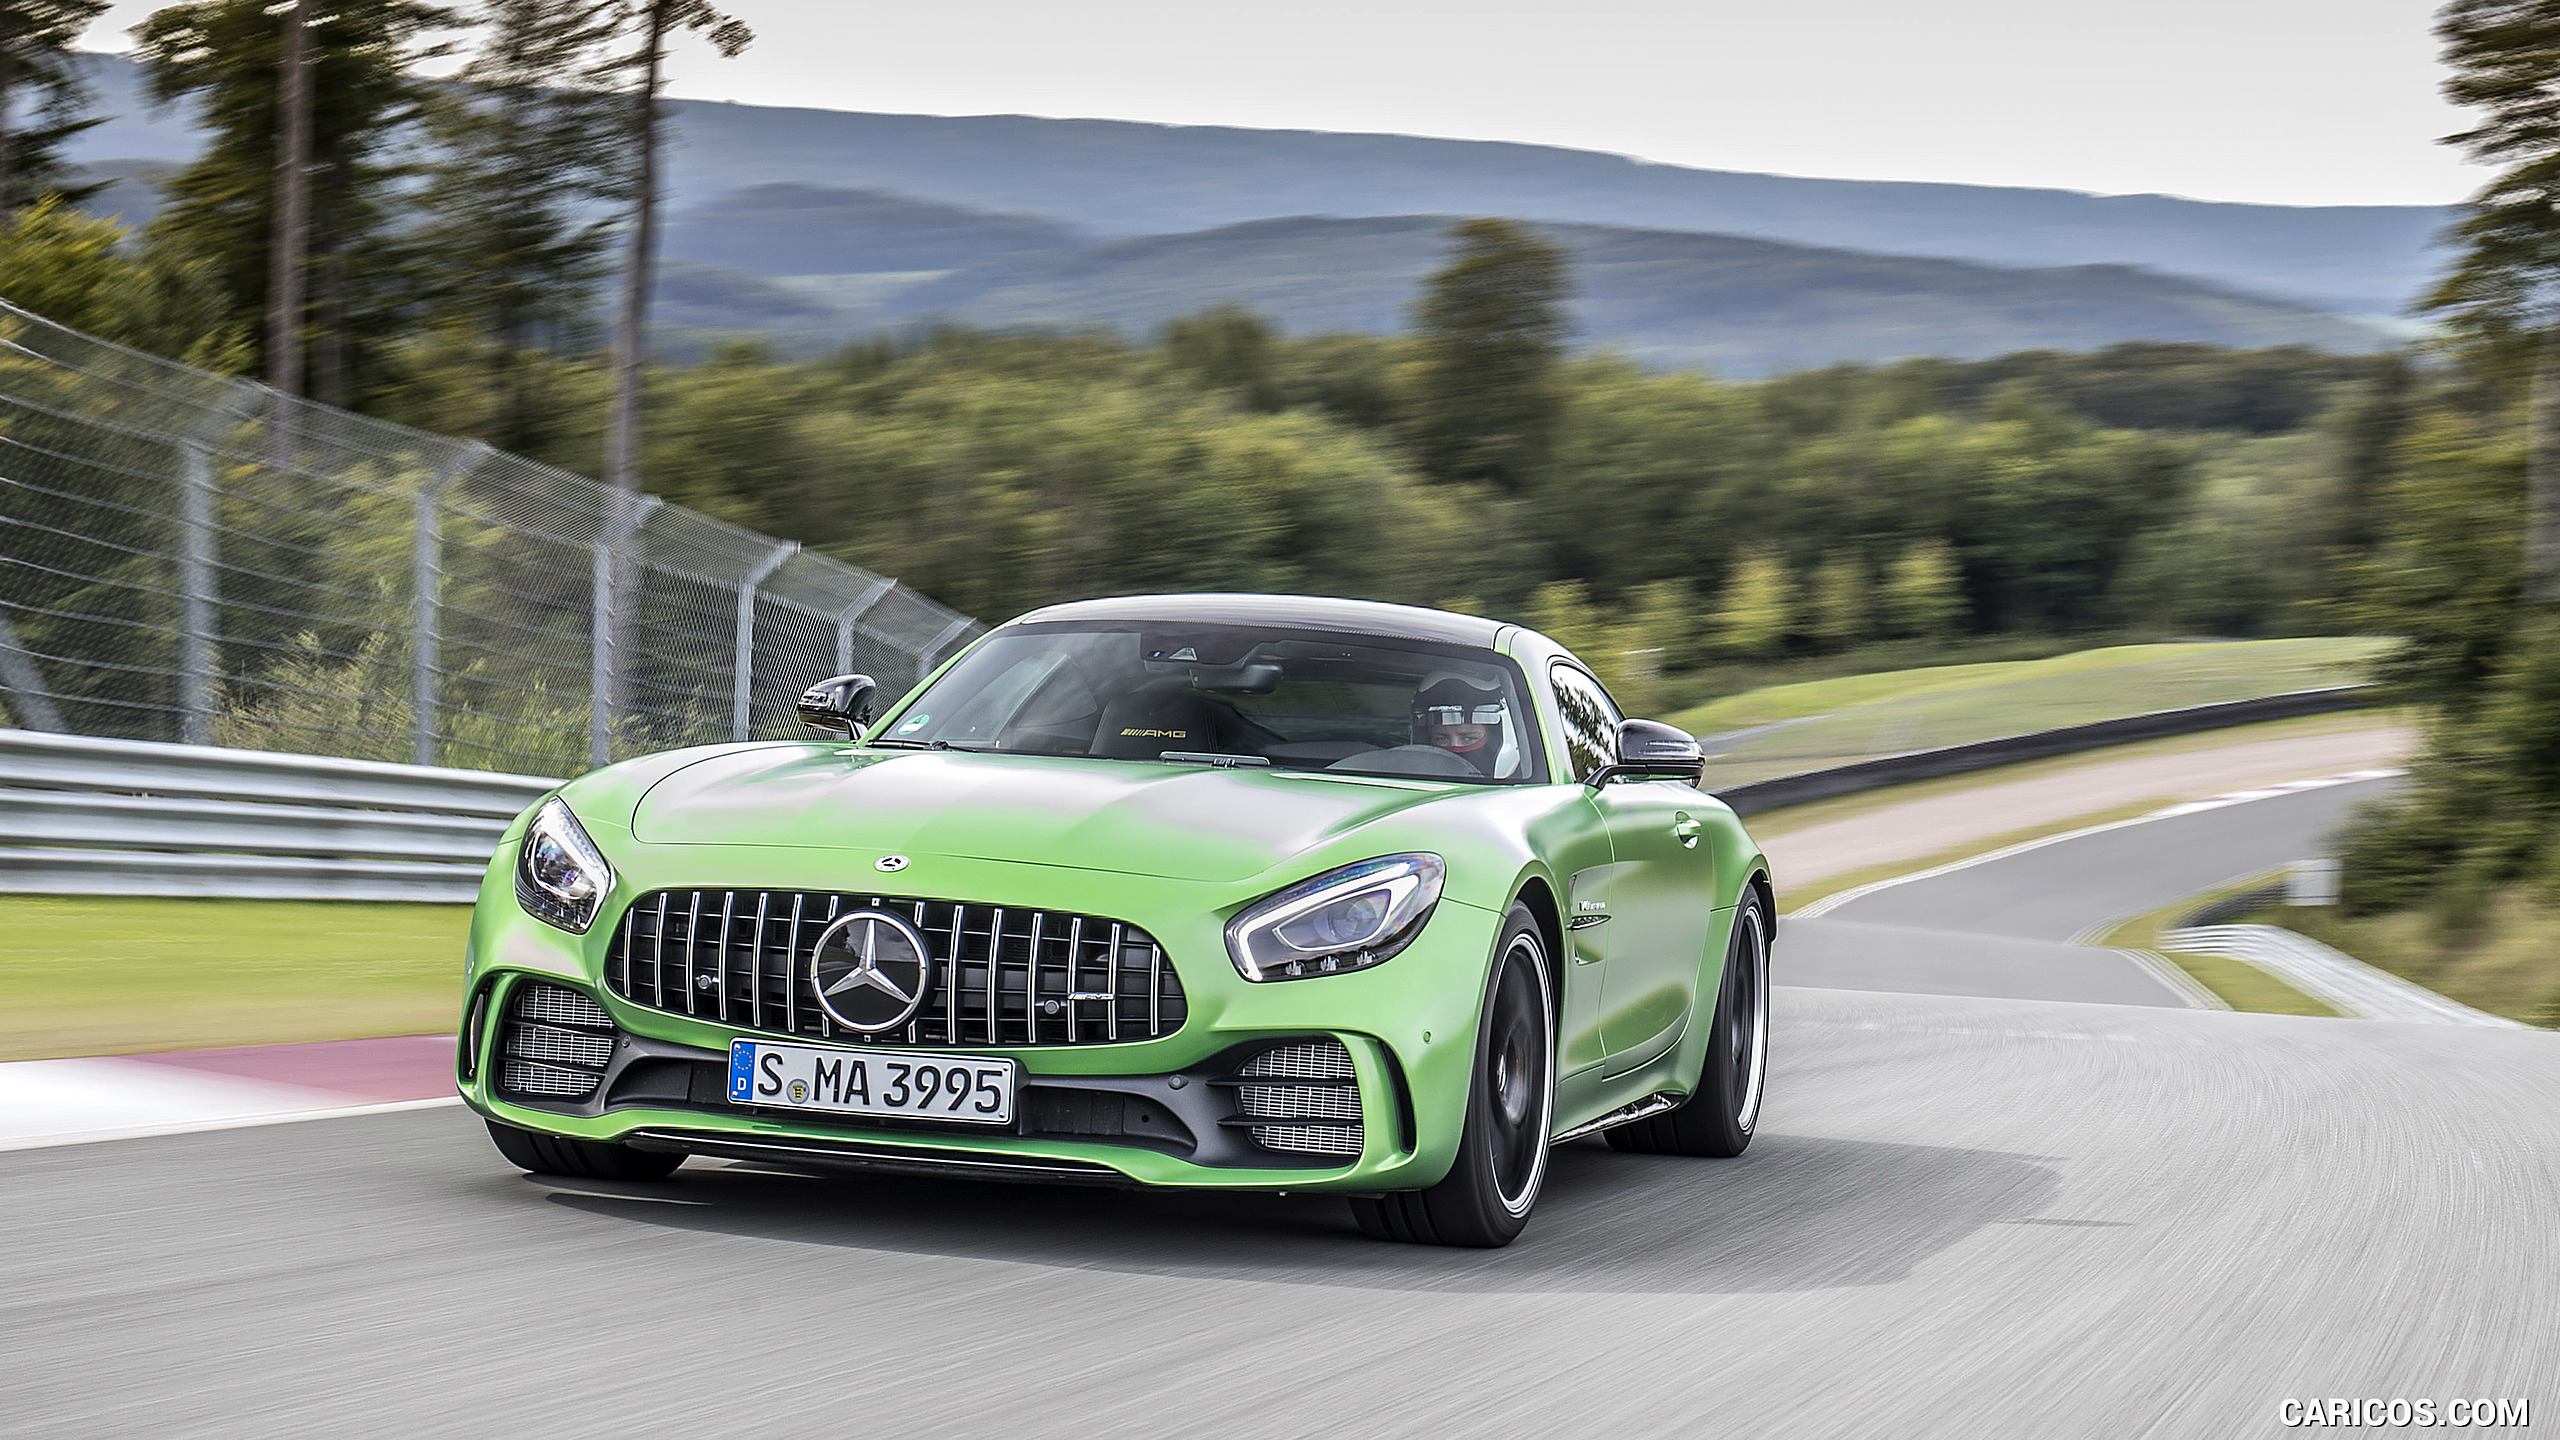 2017 Mercedes-AMG GT R Coupe - Front, #159 of 182